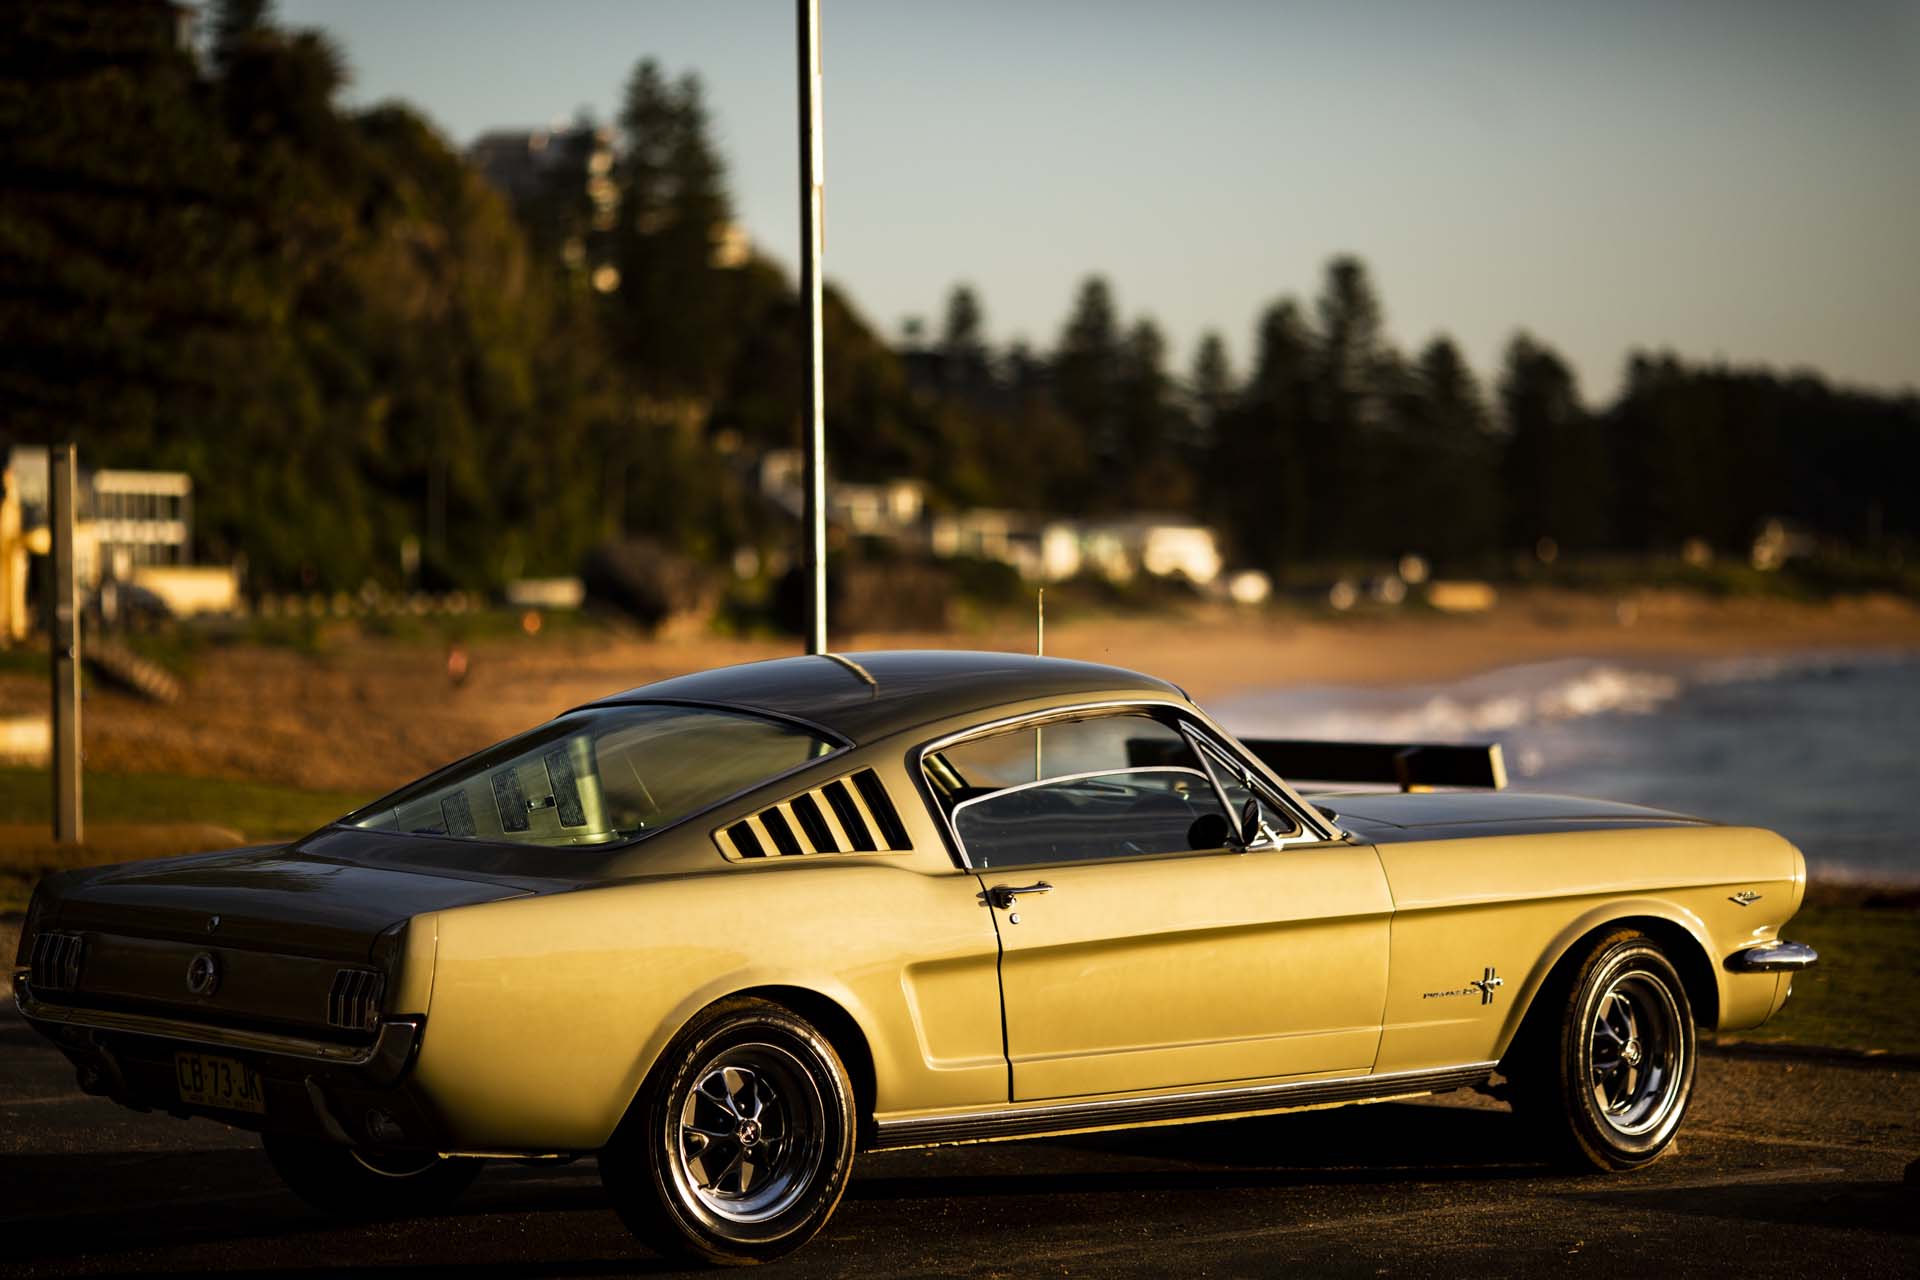 Top Blokes Foundation: The Mustang Project Raffle - Image 1